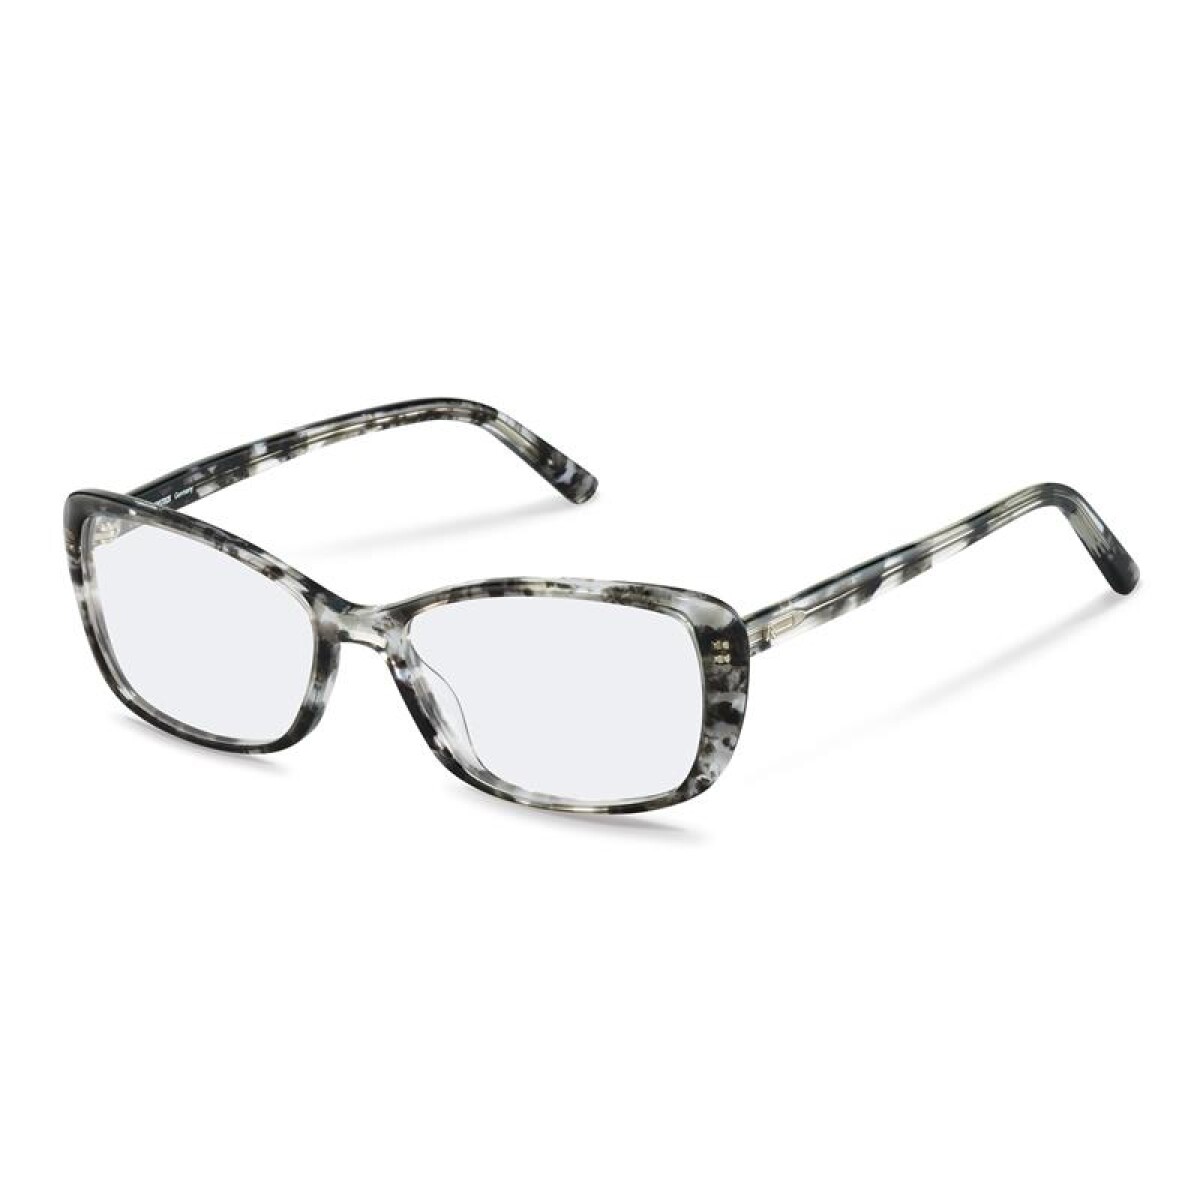 Rodenstock 5332 - A 